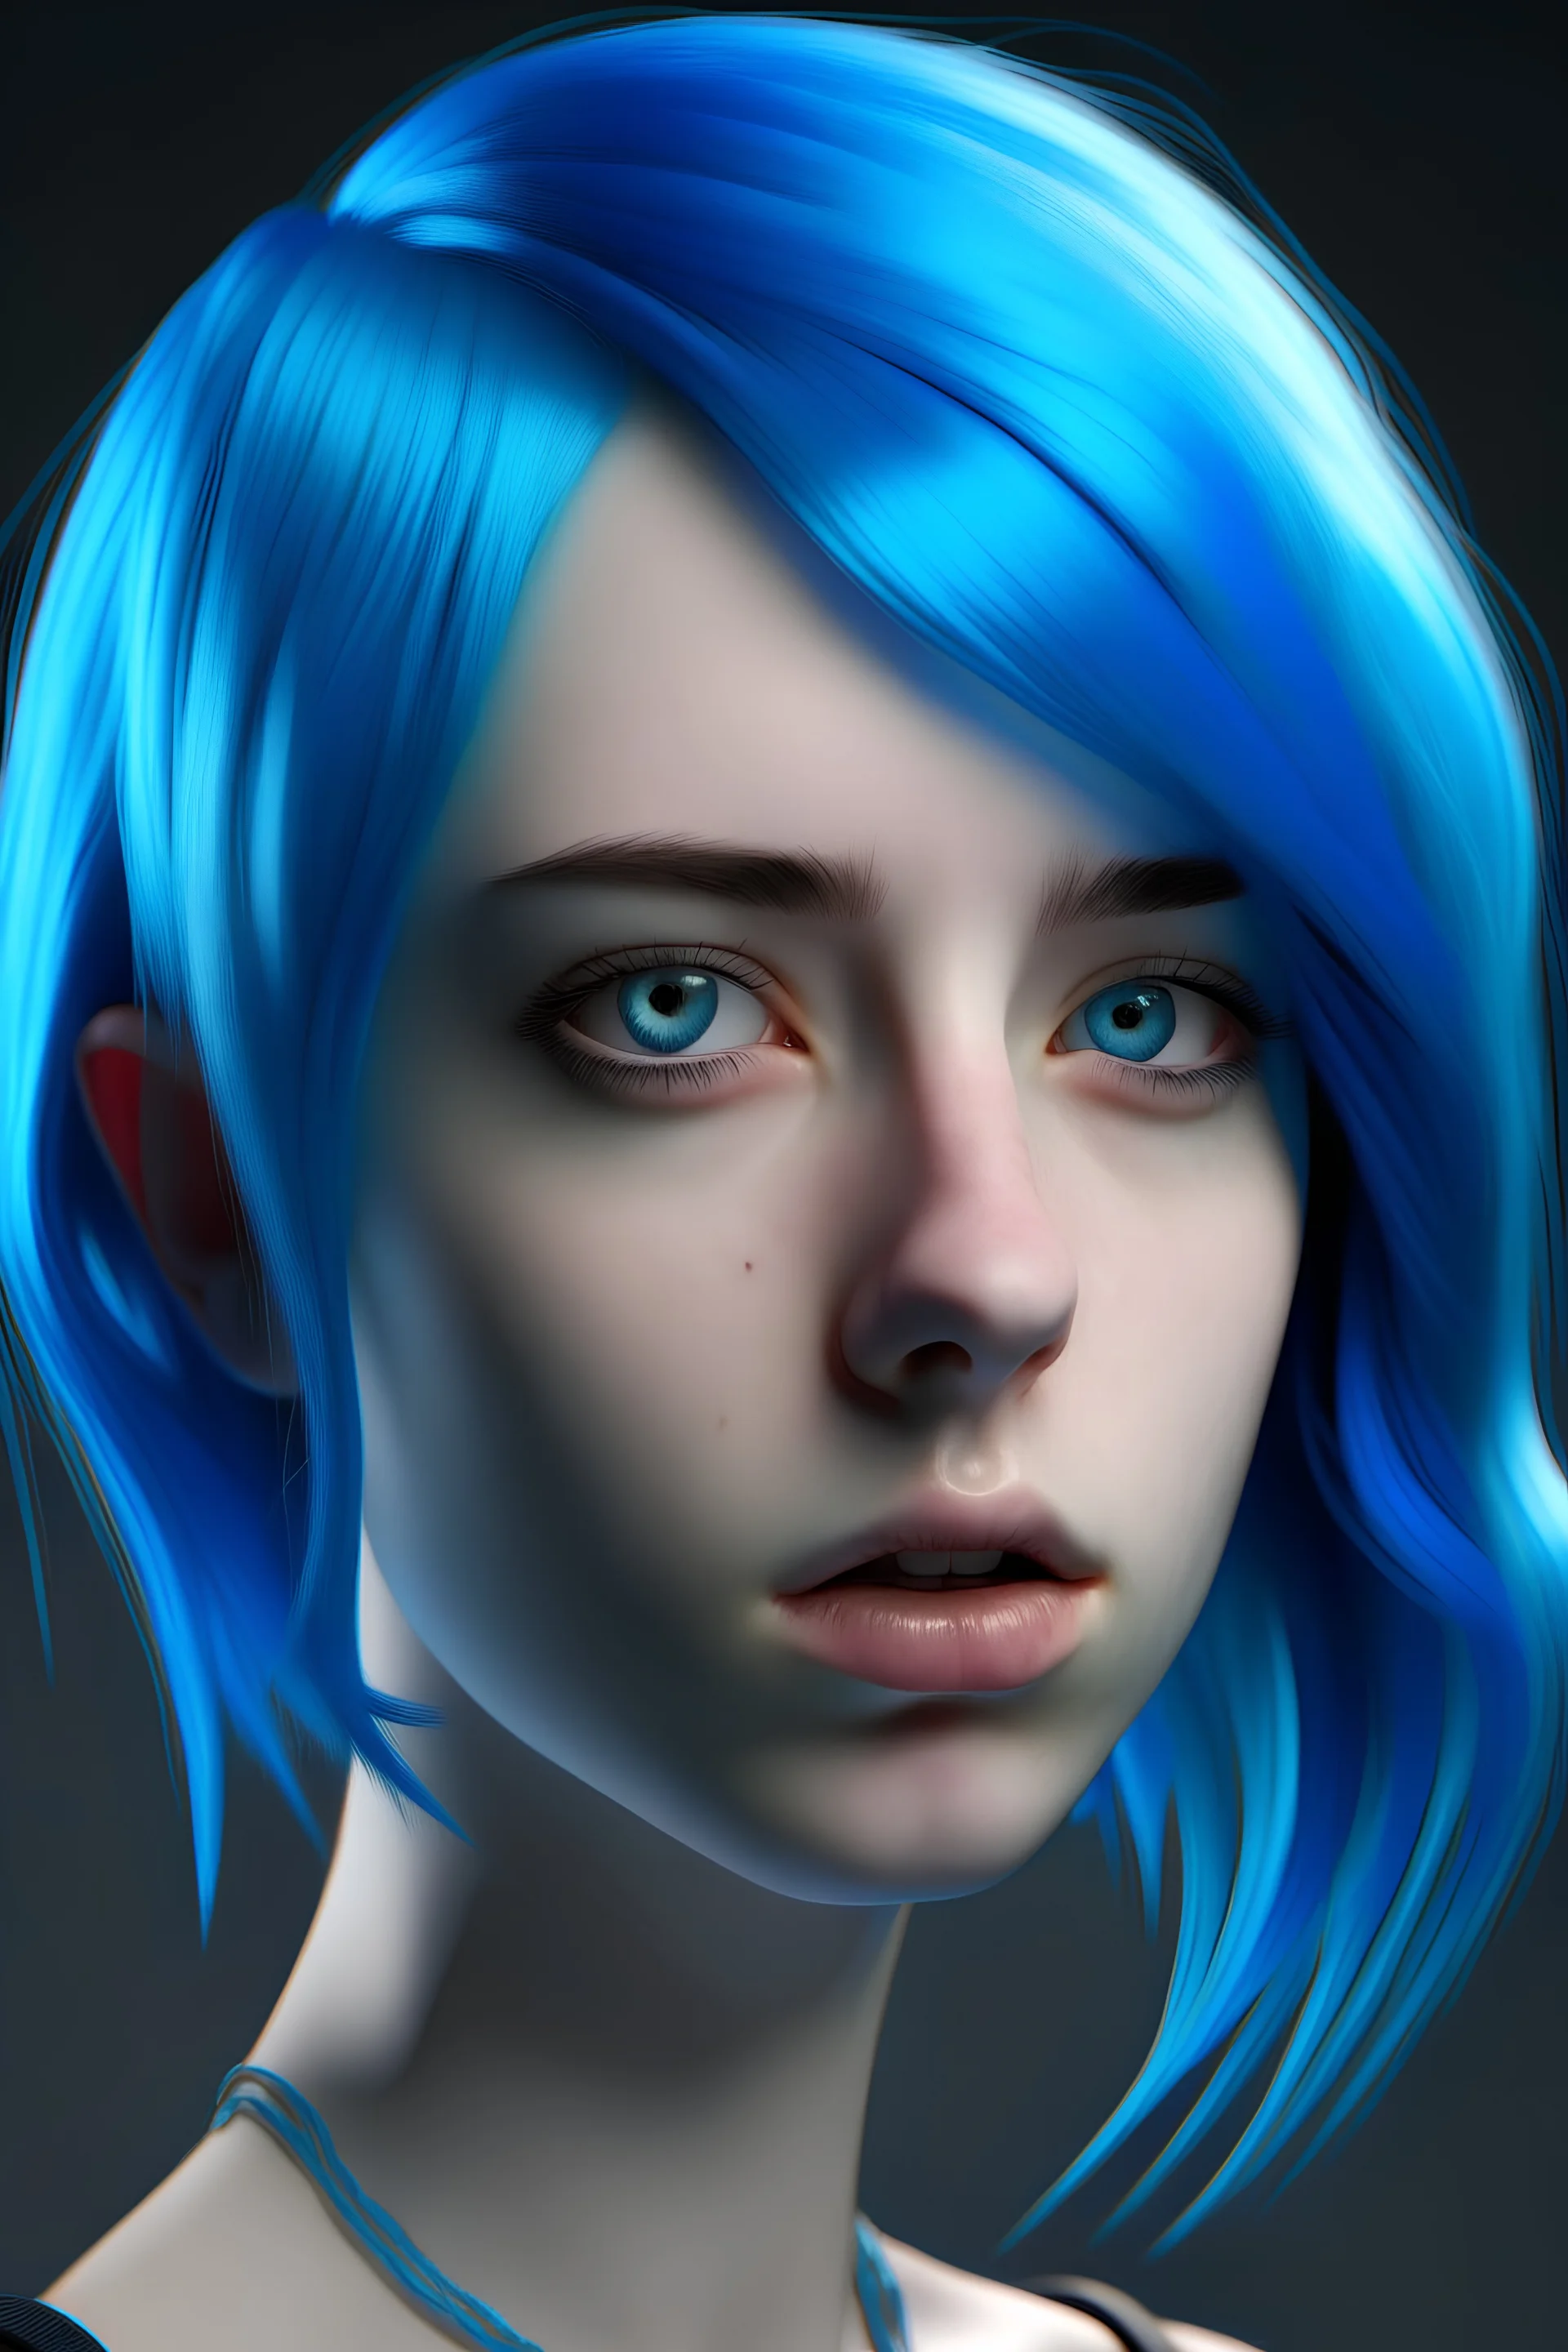 Hyper realistic model with blue hair and blue eyes